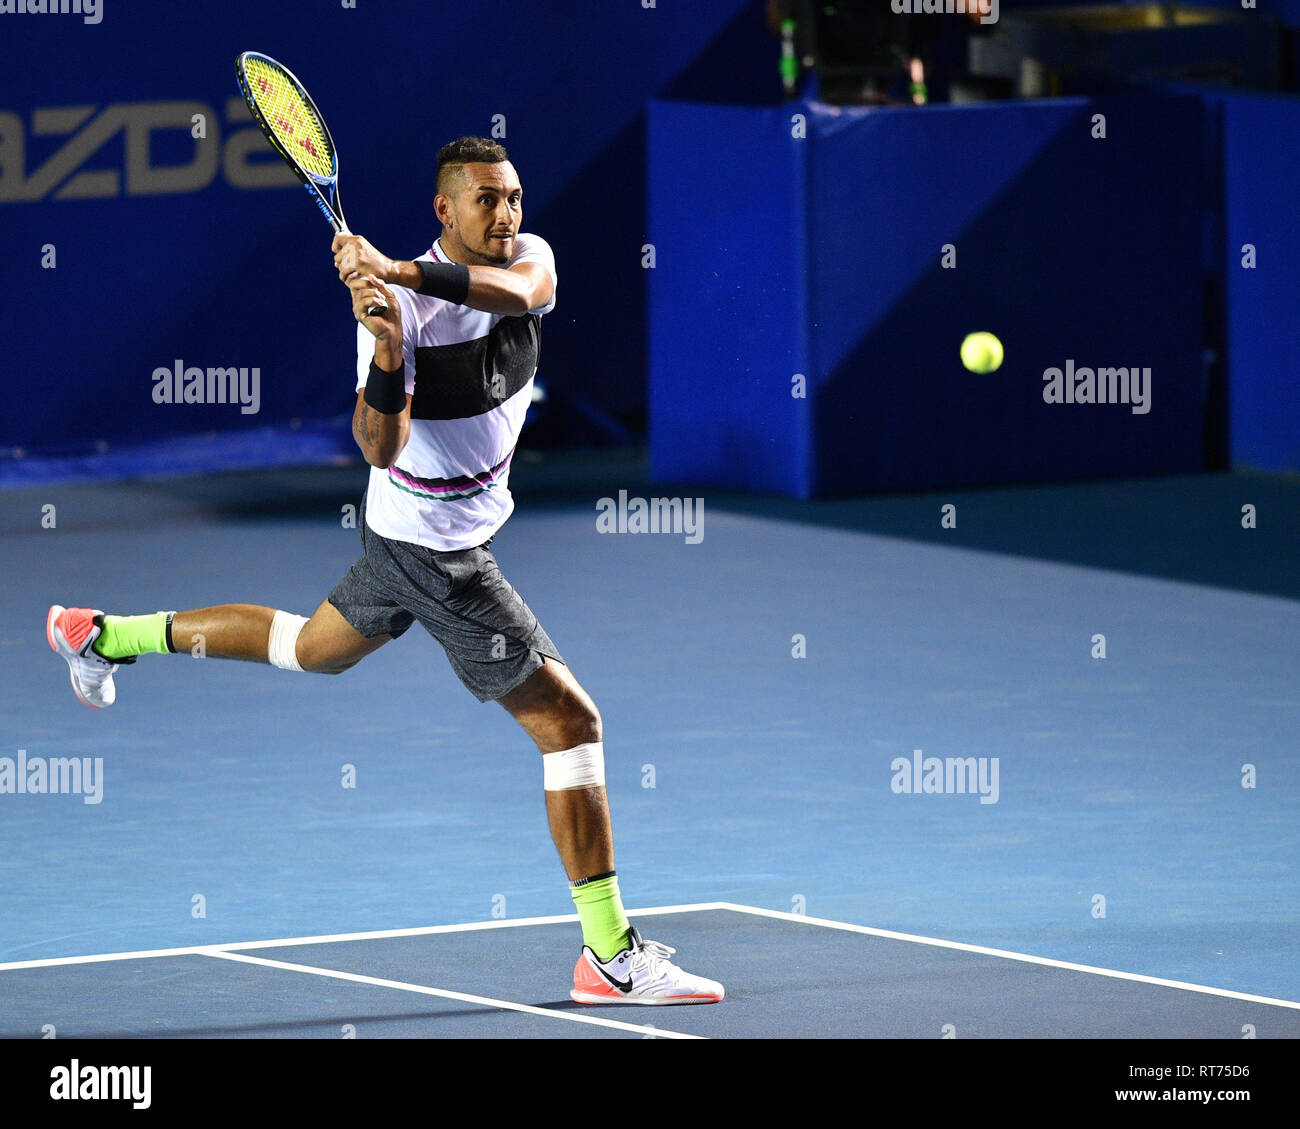 190228) -- ACAPULCO, Feb. 28, 2019 -- Nick Kyrgios of Australia hits a  return during the men's singles second round match against Rafael Nadal of  Spain at the 2019 ATP Mexican Open